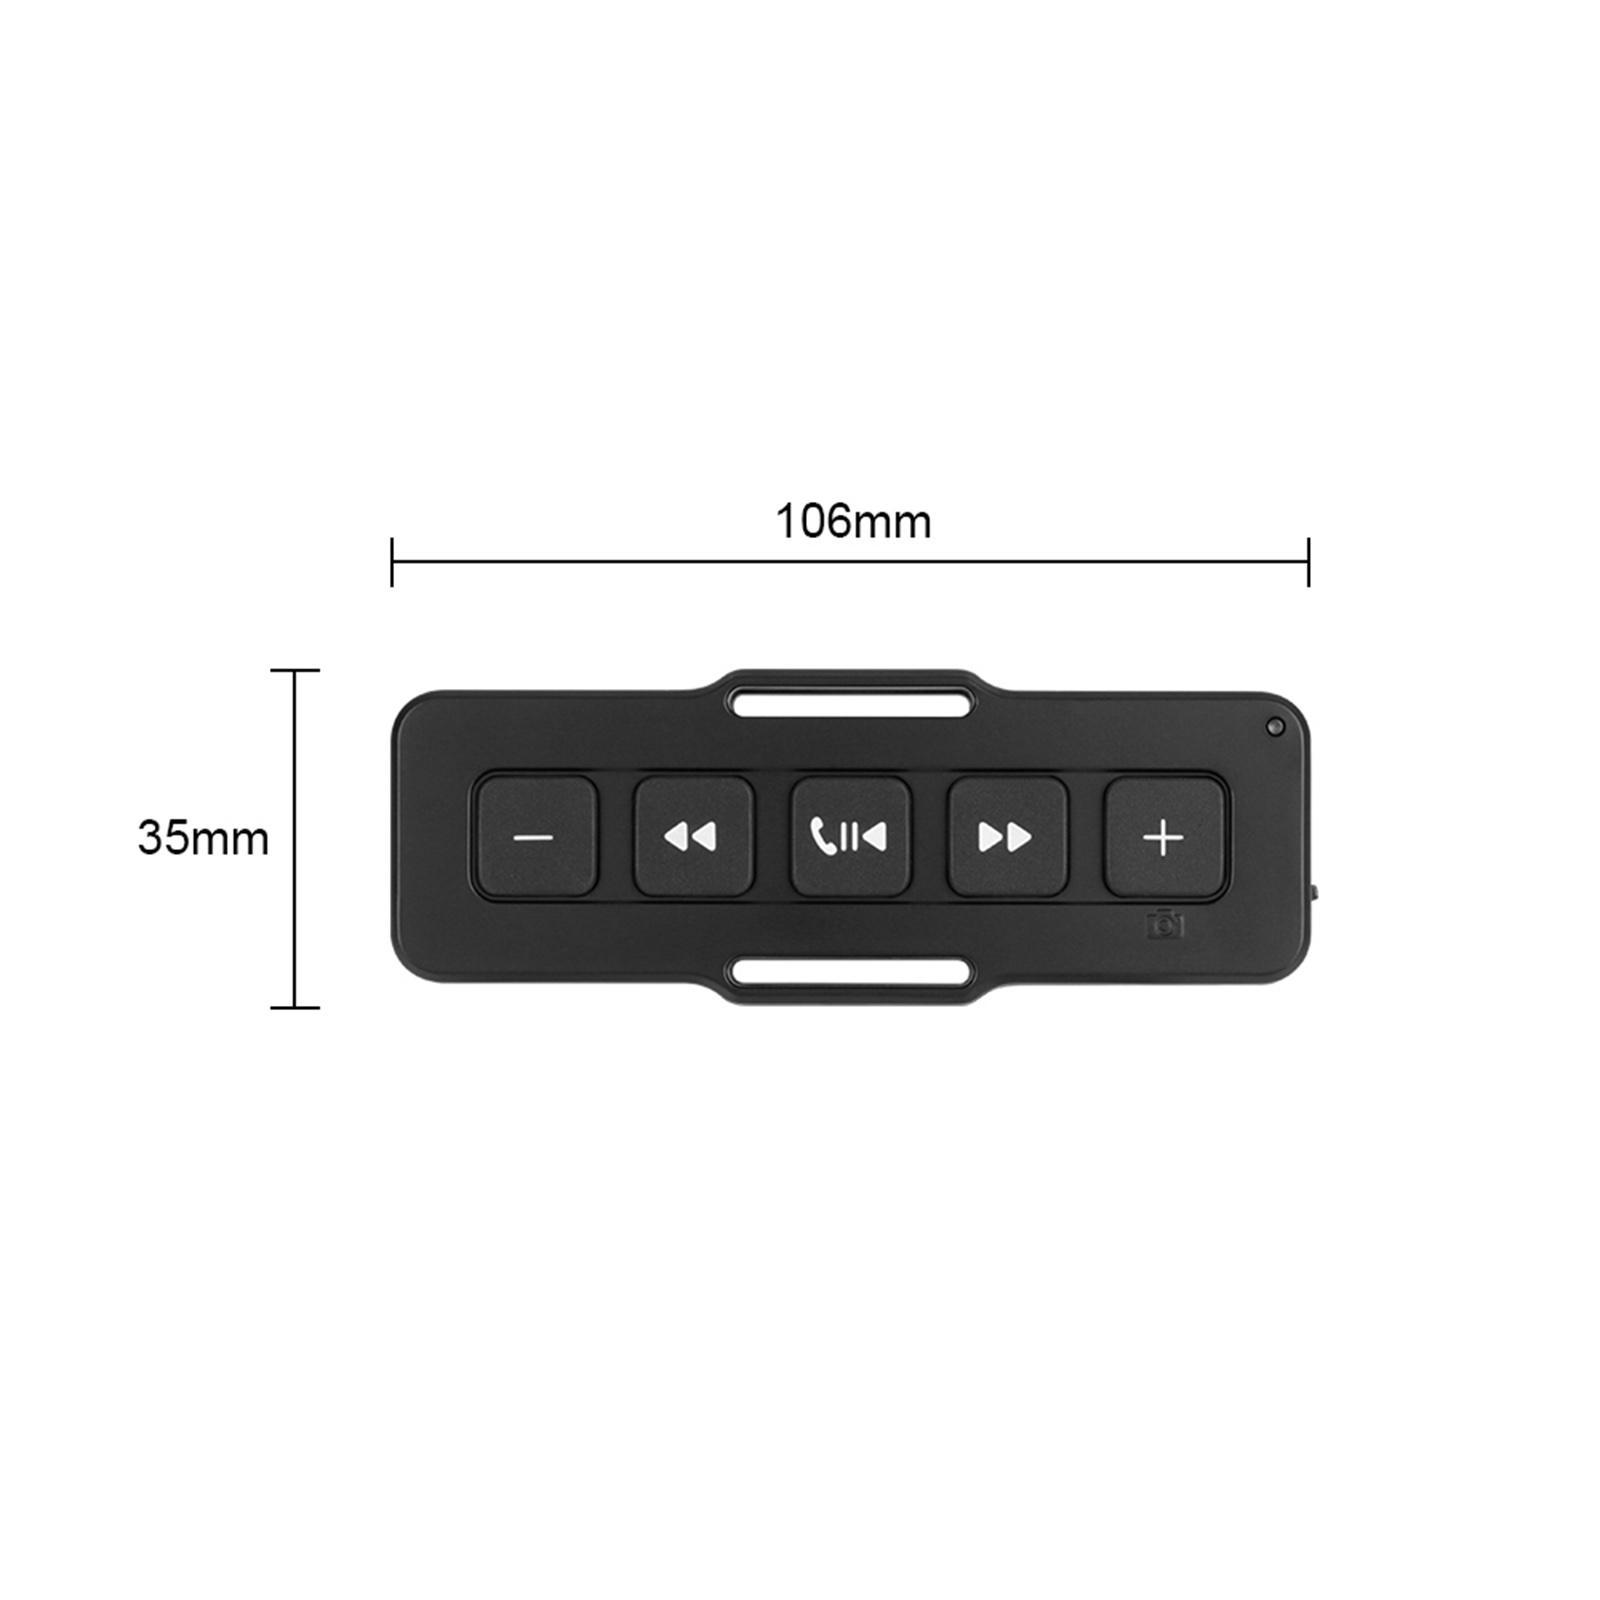 Media  Button Waterproof Car Remote Controller for